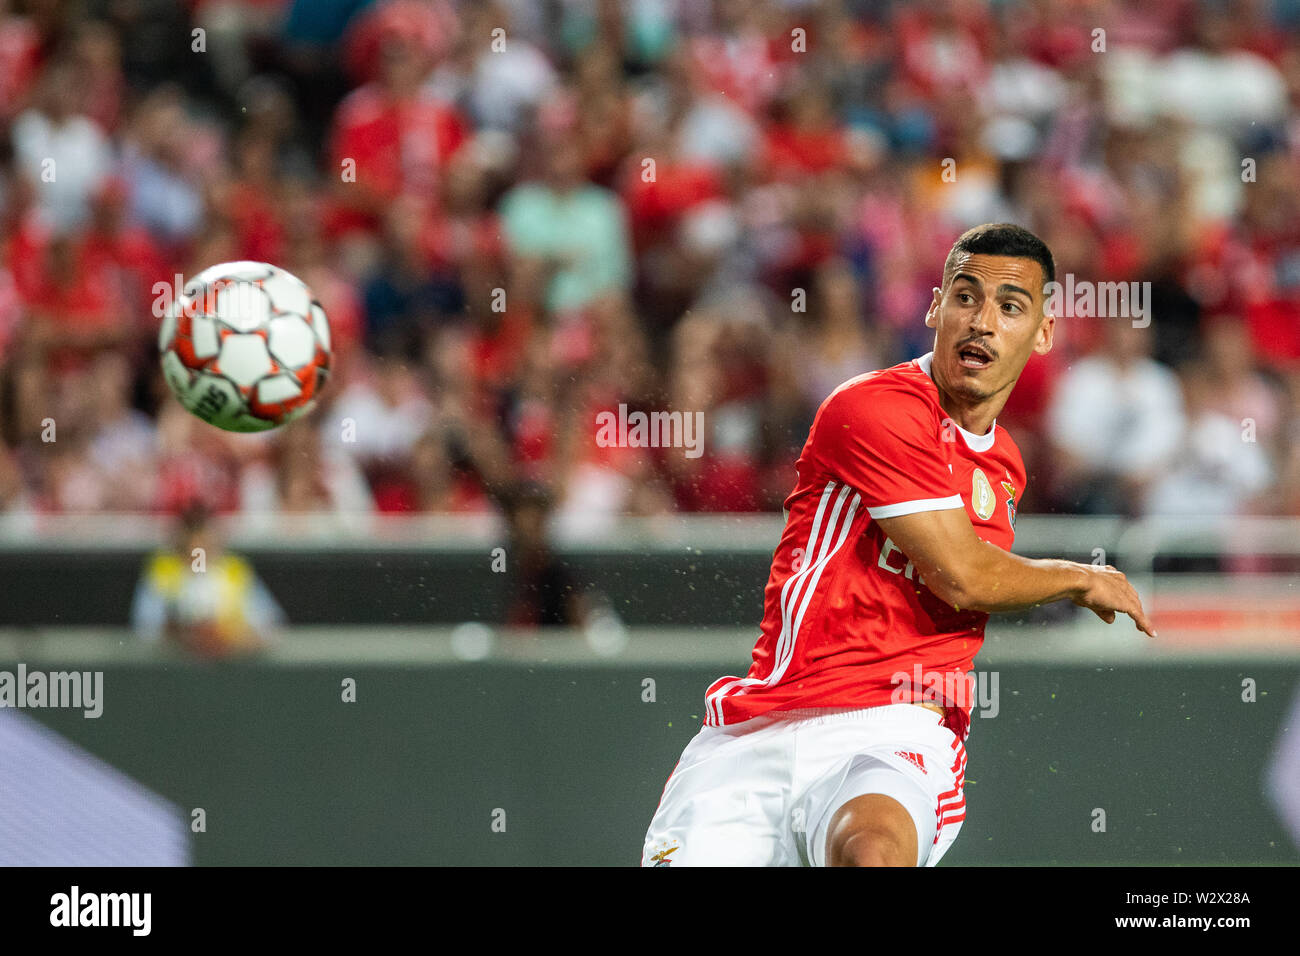 Lisbon, Portugal. 10th July, 2019. Chiquinho (Francisco Leonel Lima Silva Machado) of SL Benfica in action during the Pre-Season football match 2019/2020 between SL Benfica vs Royal Sporting Club Anderlecht.(Final score: SL Benfica 1 - 2 Royal Sporting Club Anderlecht) Credit: SOPA Images Limited/Alamy Live News Stock Photo